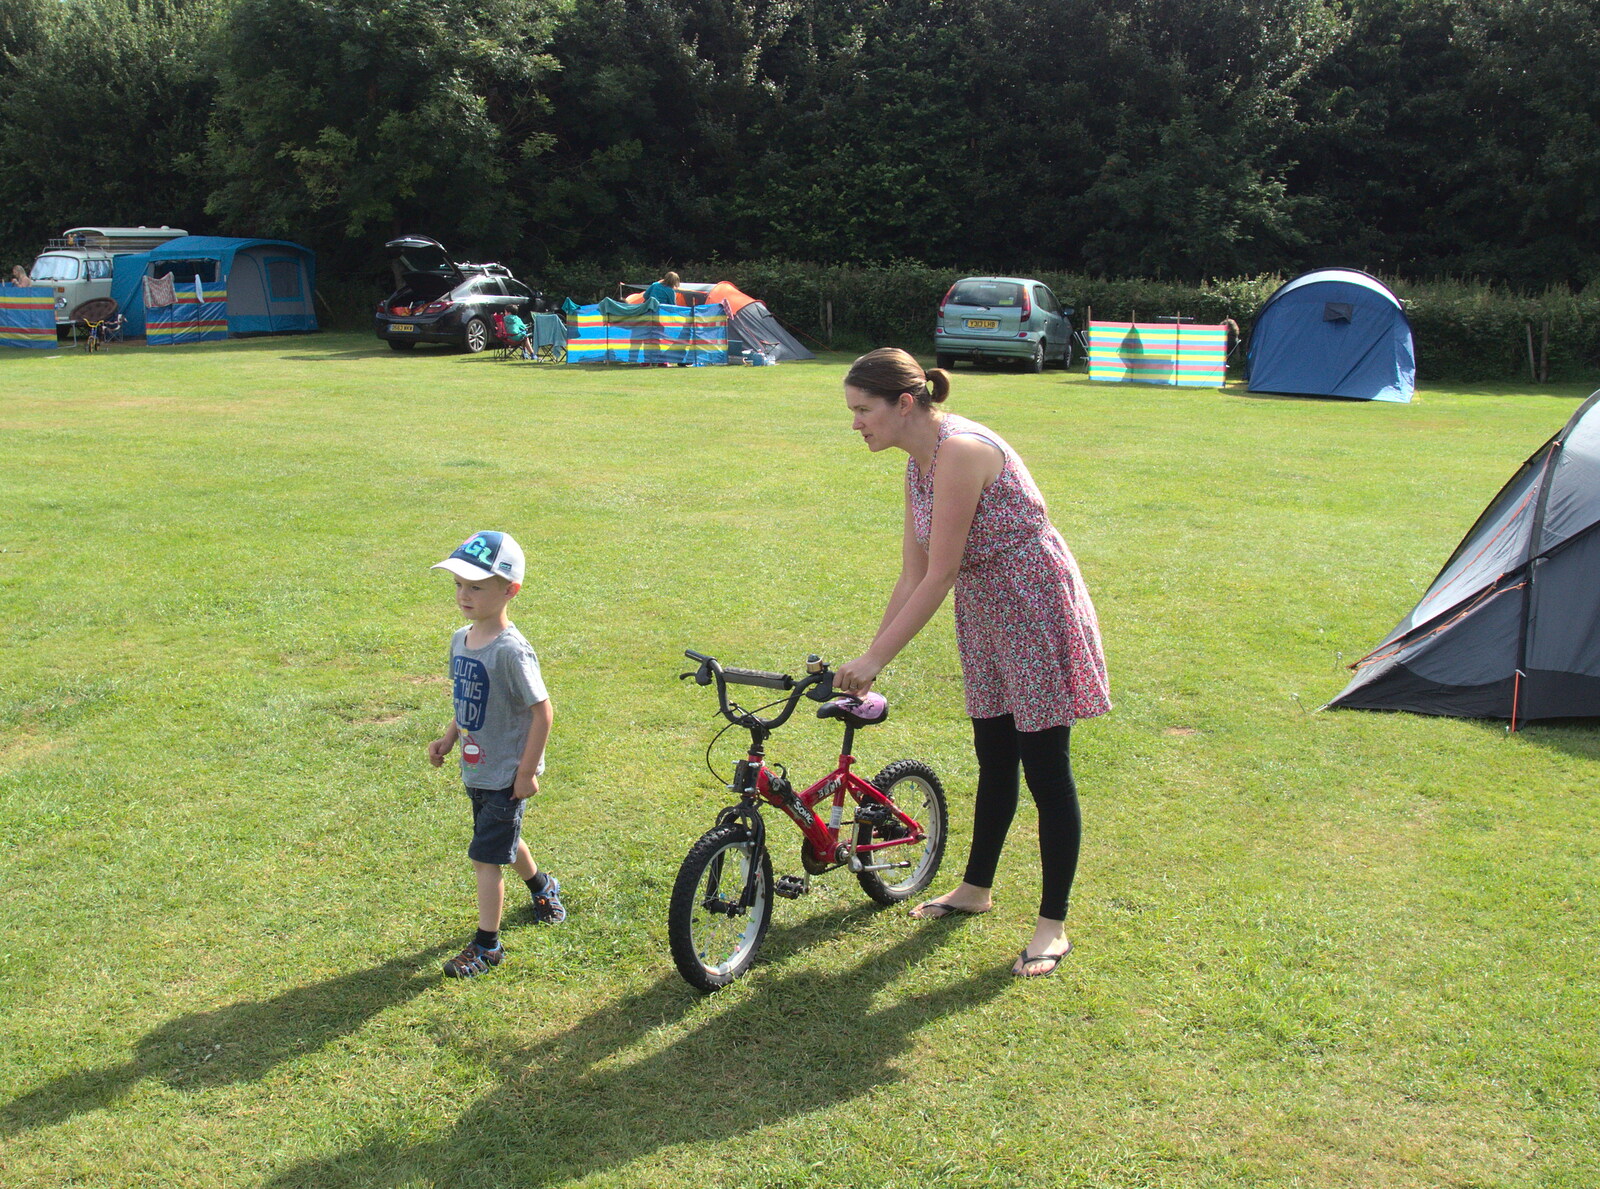 Isobel gets Harry's bike ready from Camping in West Runton, North Norfolk - 30th July 2016